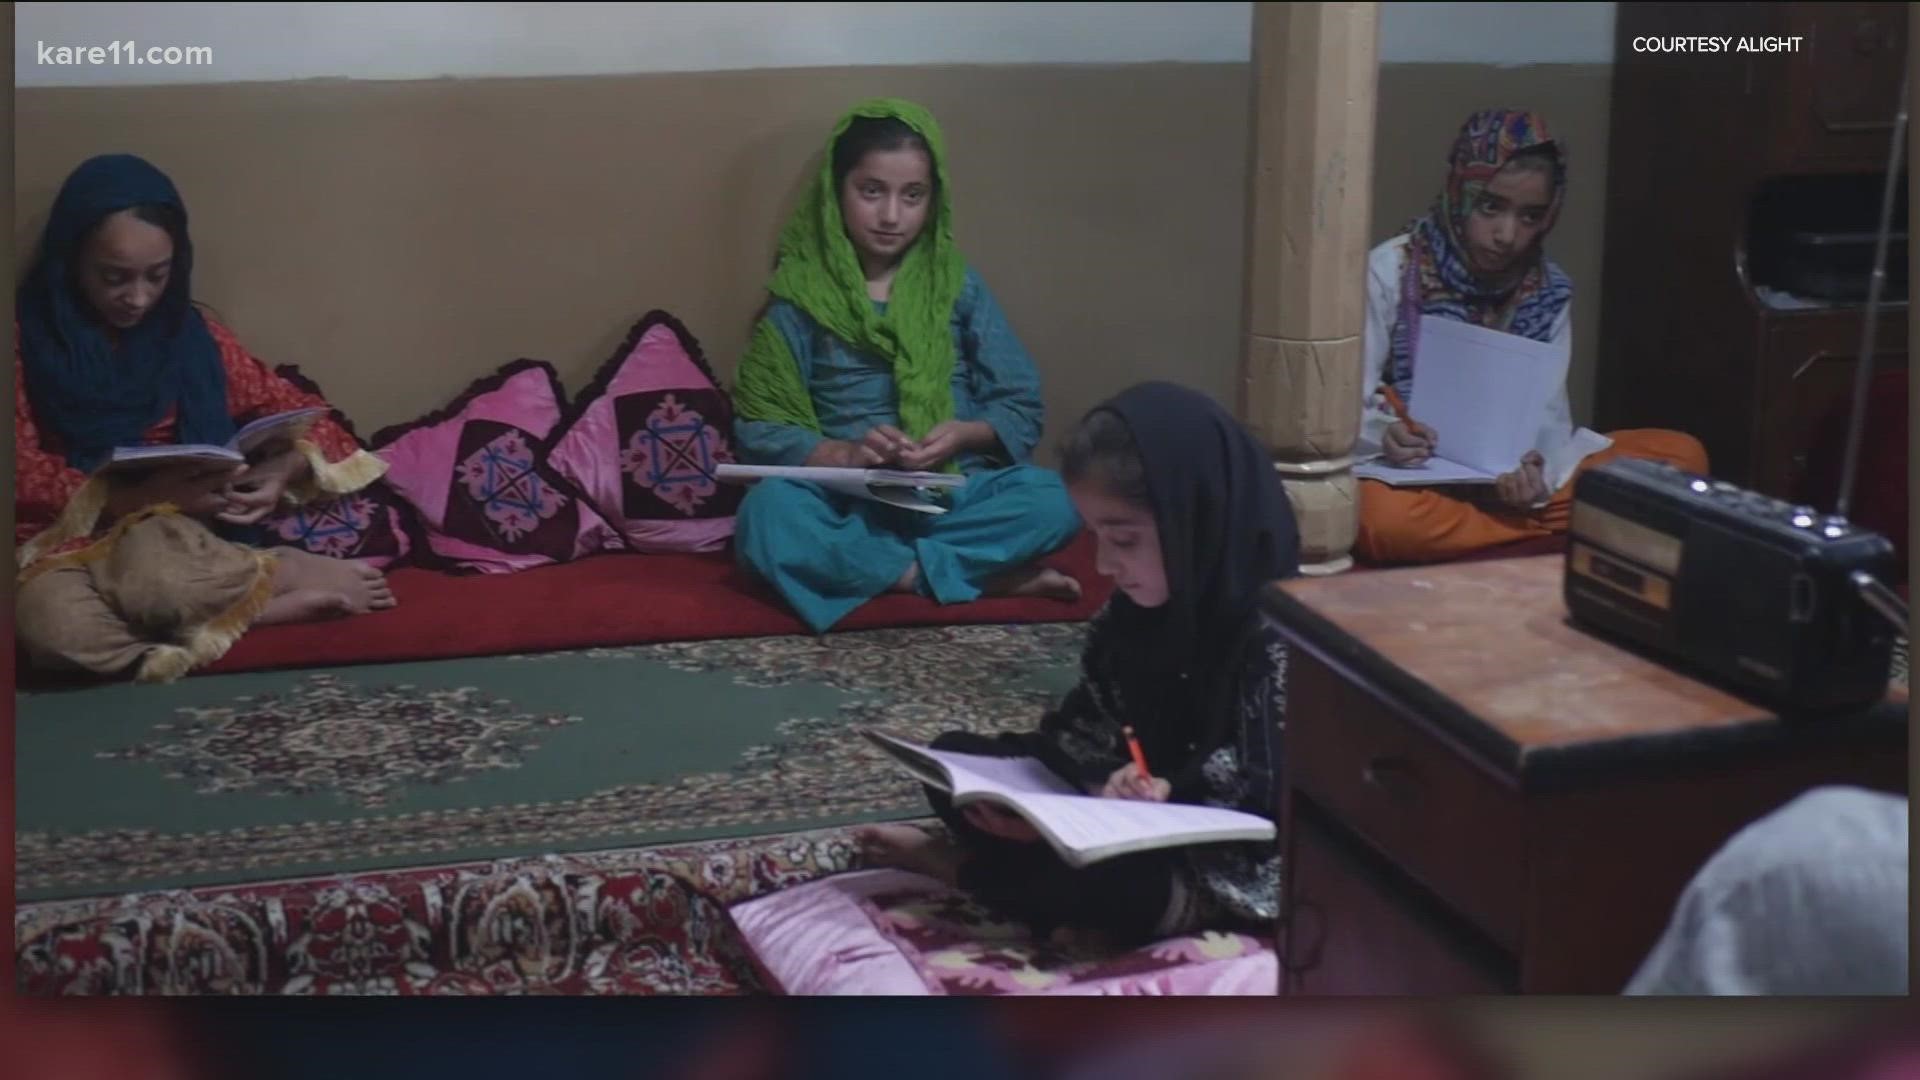 Alight – formerly the American Refugee Committee – is developing a program to make sure all Afghan children, both boys and girls, have access to education.